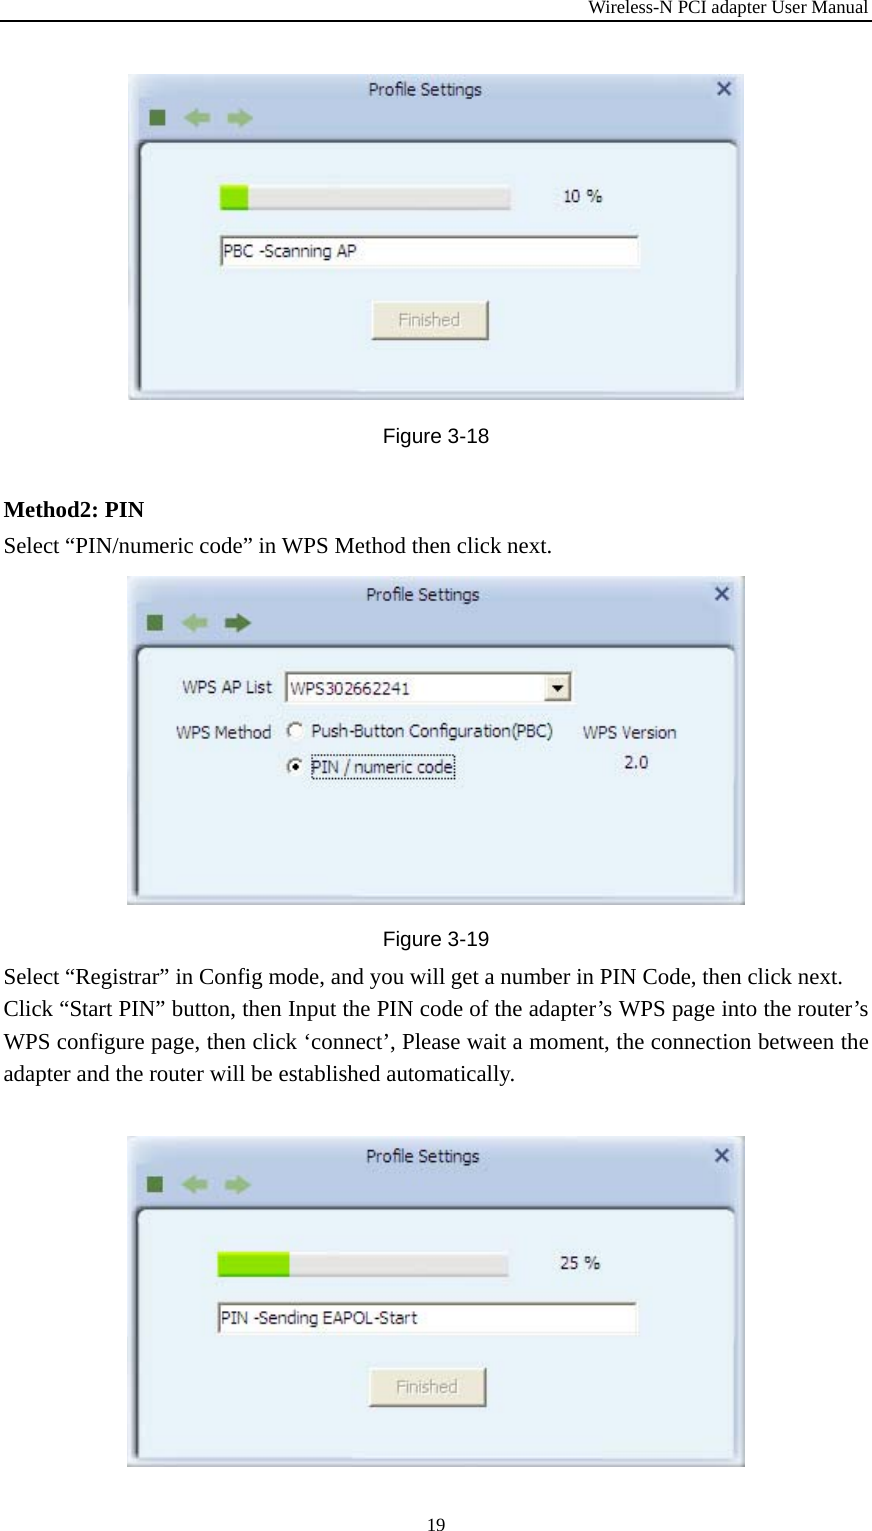 Wireless-N PCI adapter User Manual 19  Figure 3-18 Method2: PIN Select “PIN/numeric code” in WPS Method then click next.Figure 3-19 Select “Registrar” in Config mode, and you will get a number in PIN Code, then click next. Click “Start PIN” button, then Input the PIN code of the adapter’s WPS page into the router’s WPS configure page, then click ‘connect’, Please wait a moment, the connection between the adapter and the router will be established automatically.  